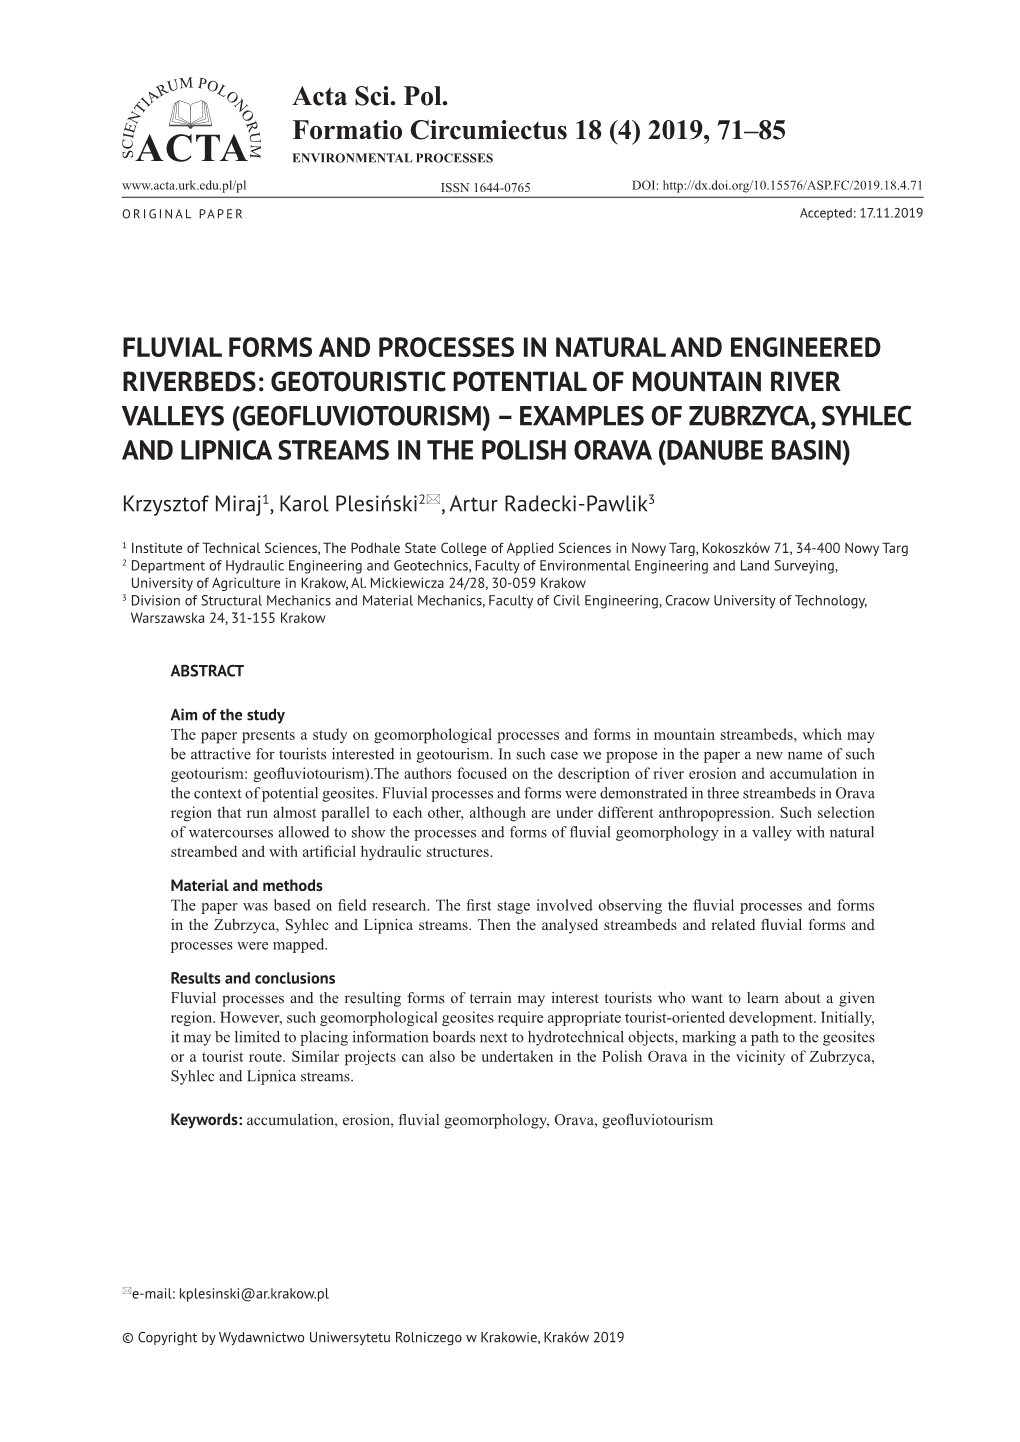 Acta Sci. Pol. Formatio Circumiectus 18 (4) 2019, 71–85 FLUVIAL FORMS and PROCESSES in NATURAL and ENGINEERED RIVERBEDS: GEOTO